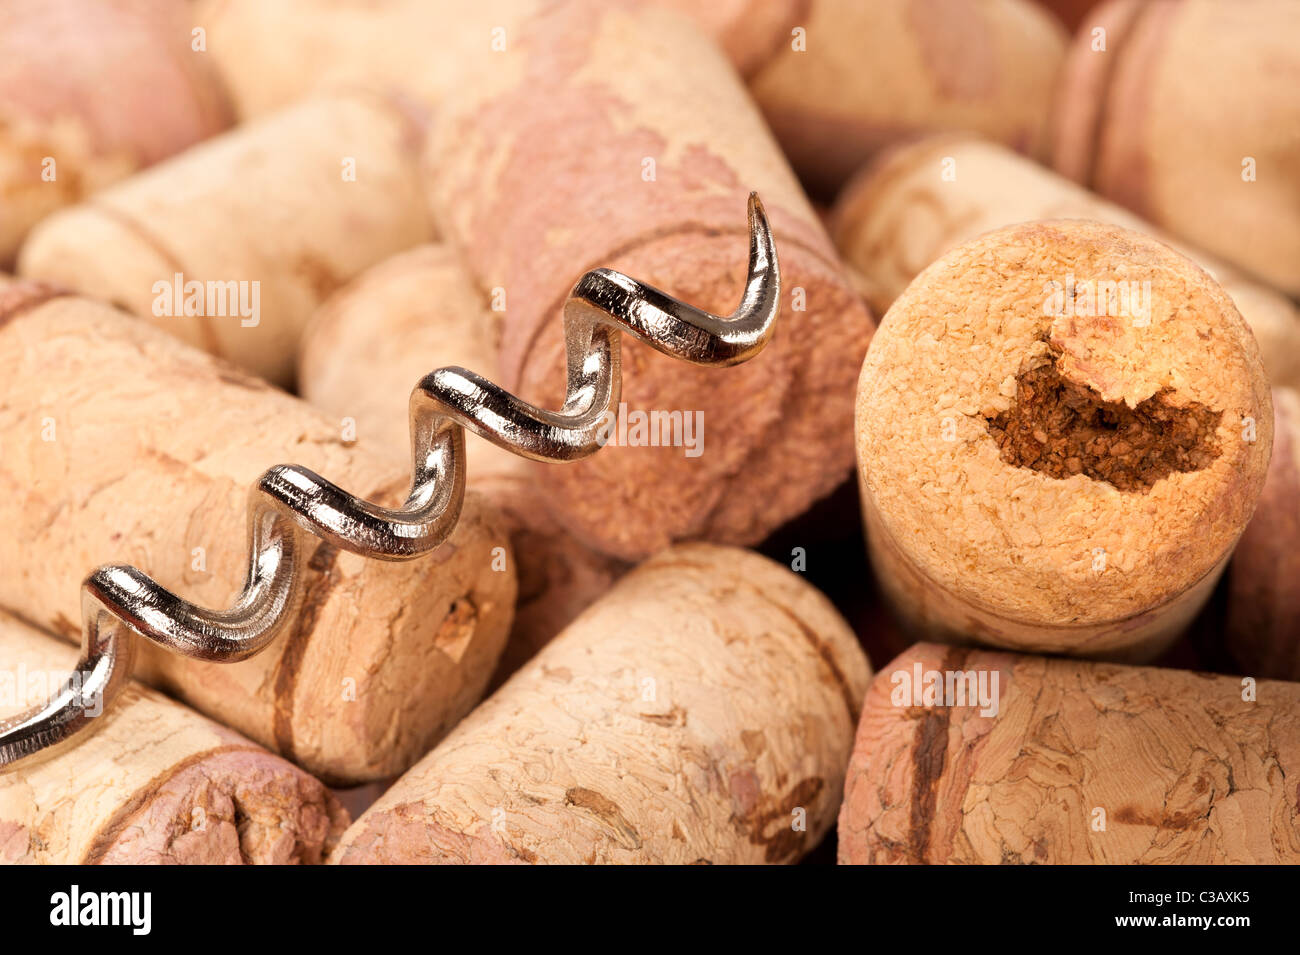 A close up of a corkscrew and wine bottle corks, also known as bottle stoppers. Stock Photo